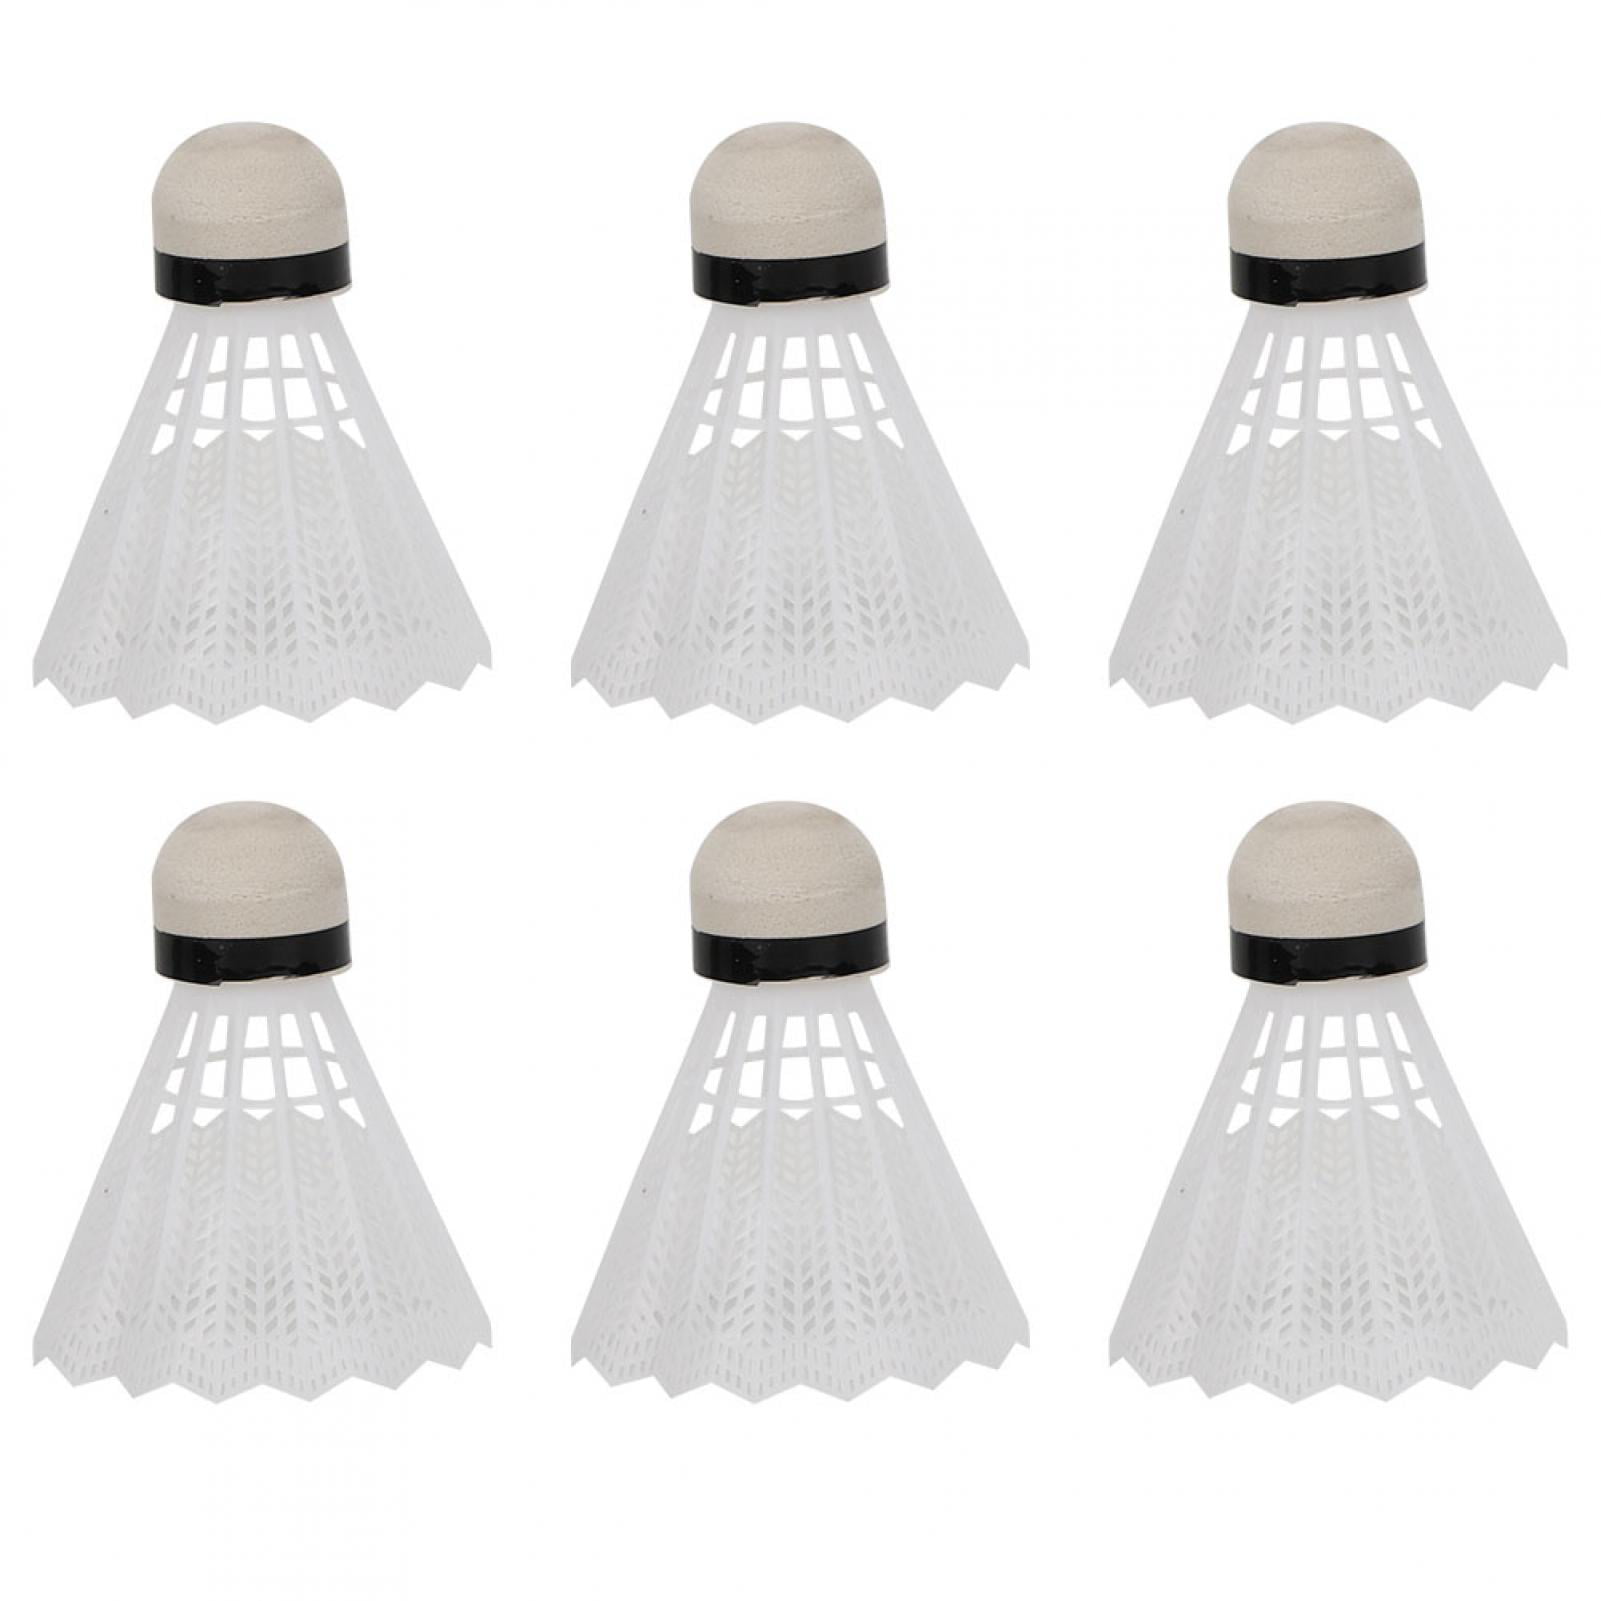 6 Pcs Badminton White Plastic Shuttlecocks Indoor Outdoor Gym Sports Accessories 